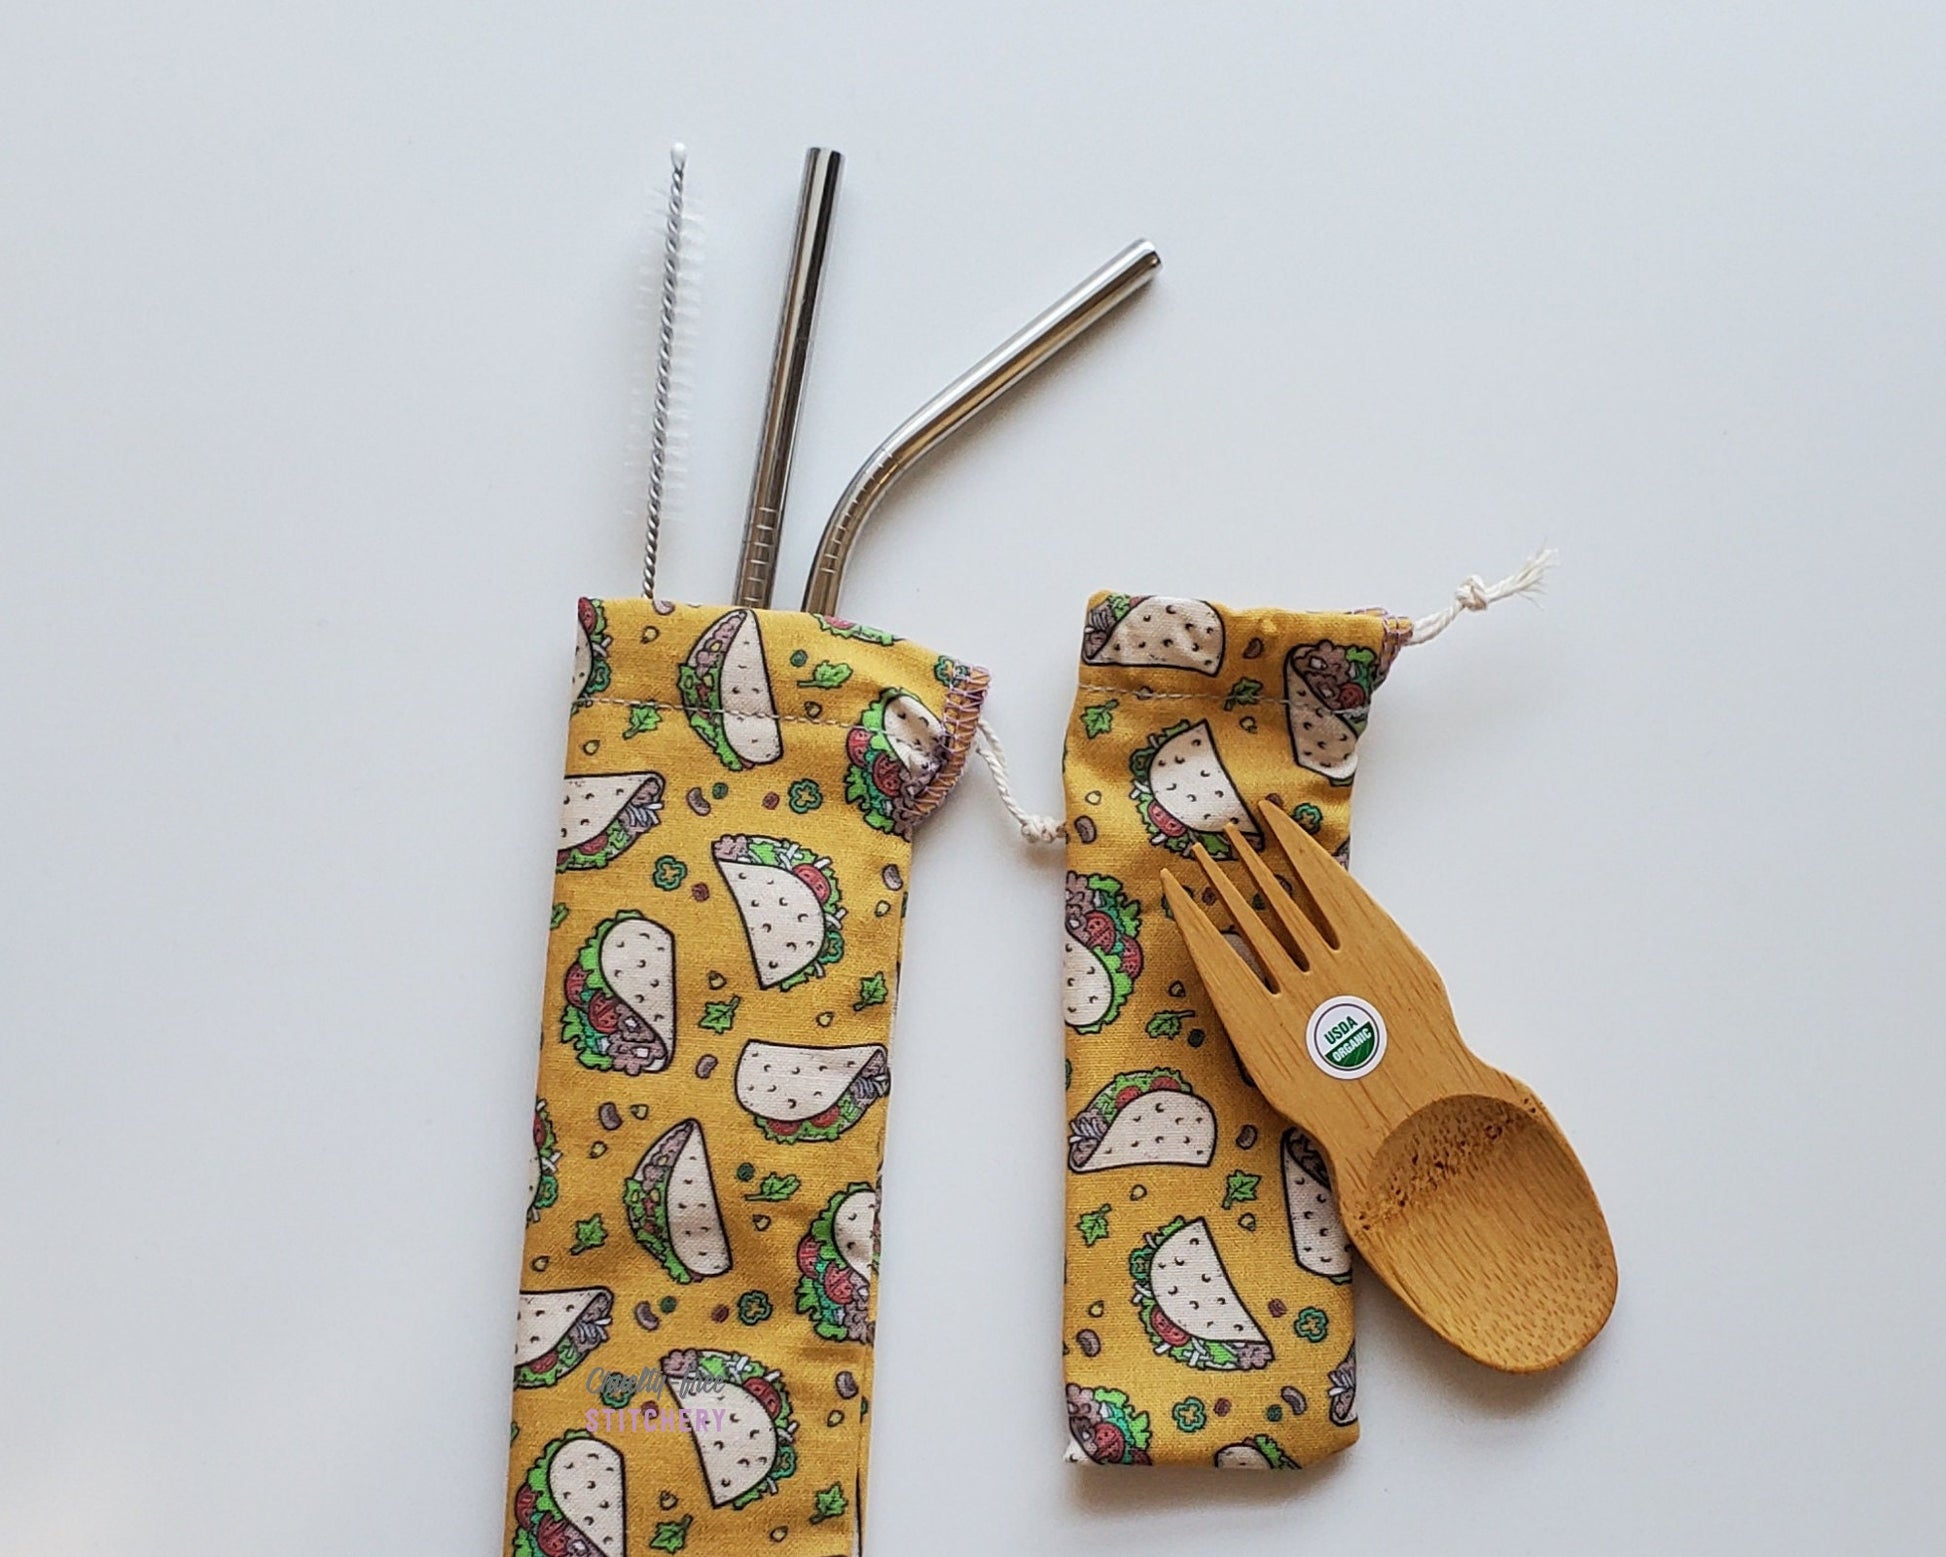 Reusable bamboo spork and stainless steel straw pouch set. The pouches are both a mustard yellow color with small cartoon tacos and fillings scattered around.